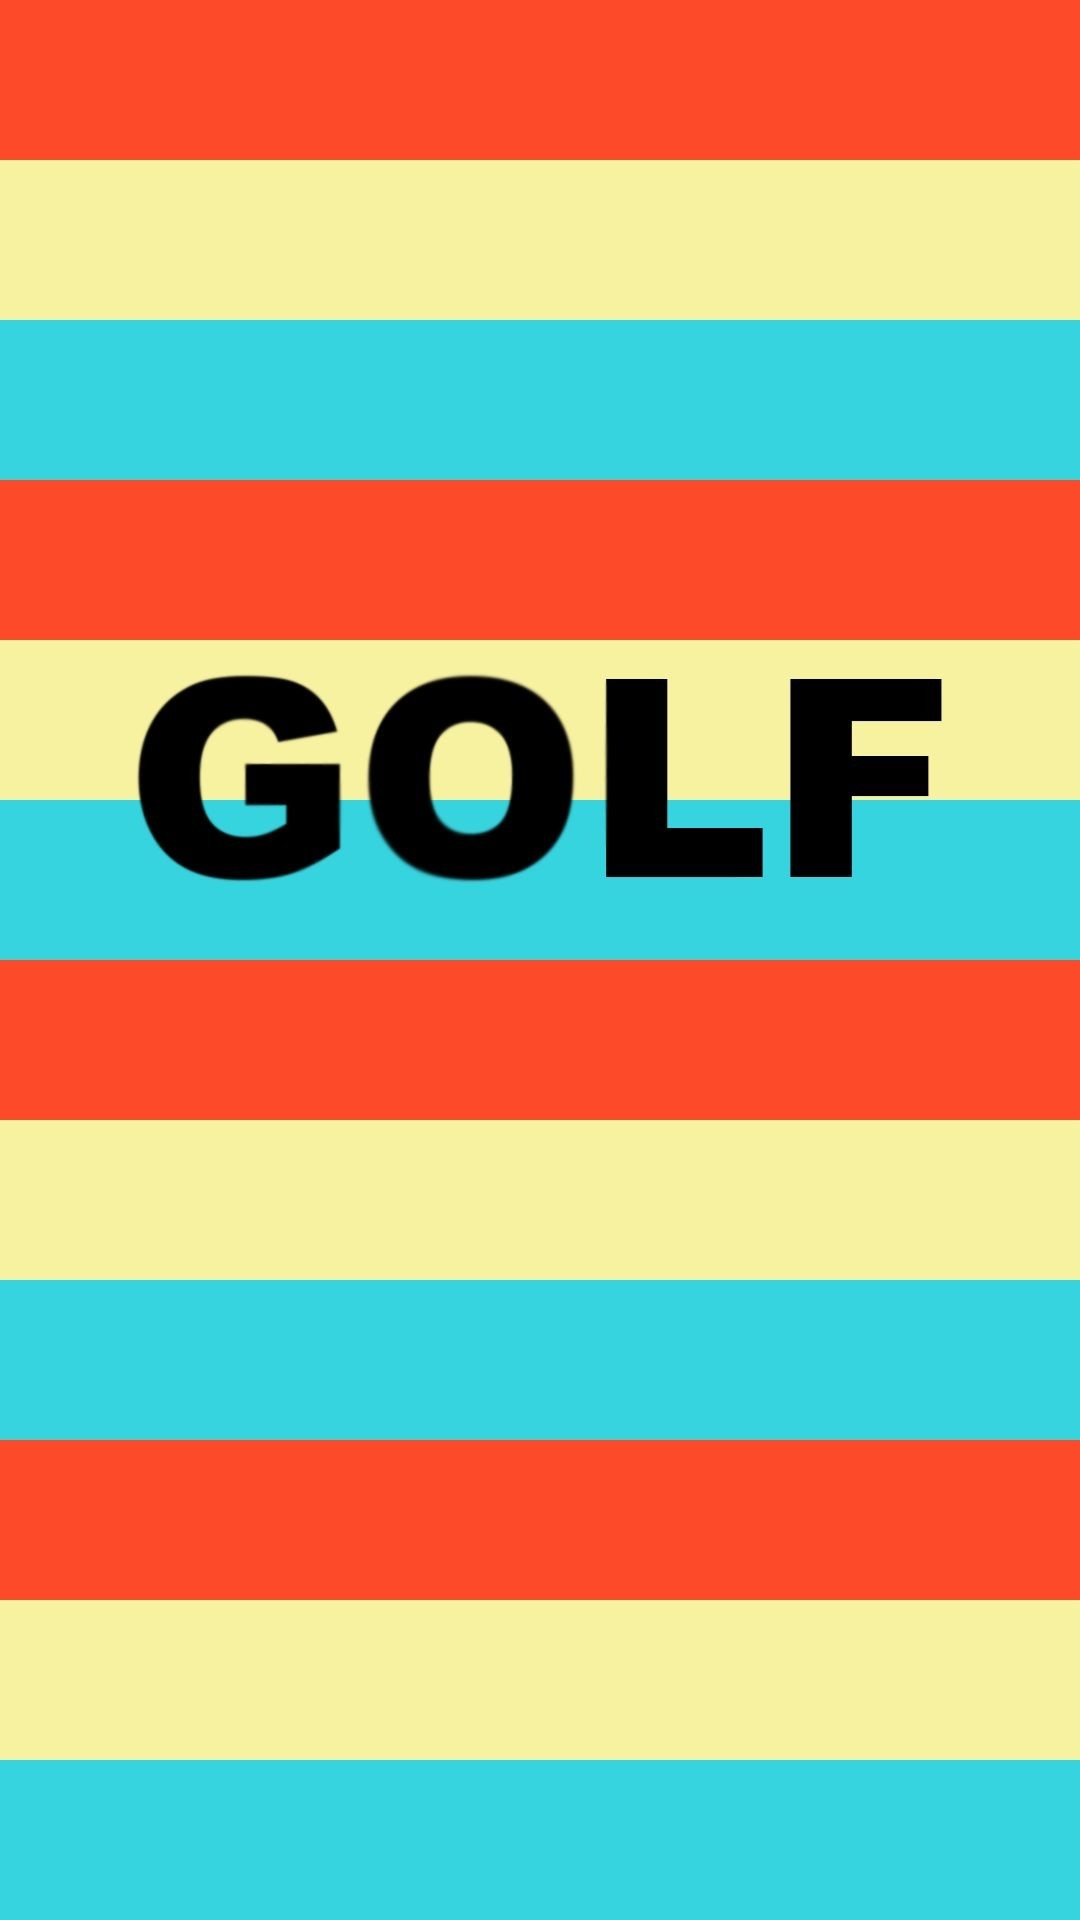 1080x1920  GOLF Striped Mobile Wallpaper () Need #iPhone #6S #Plus #Wallpaper